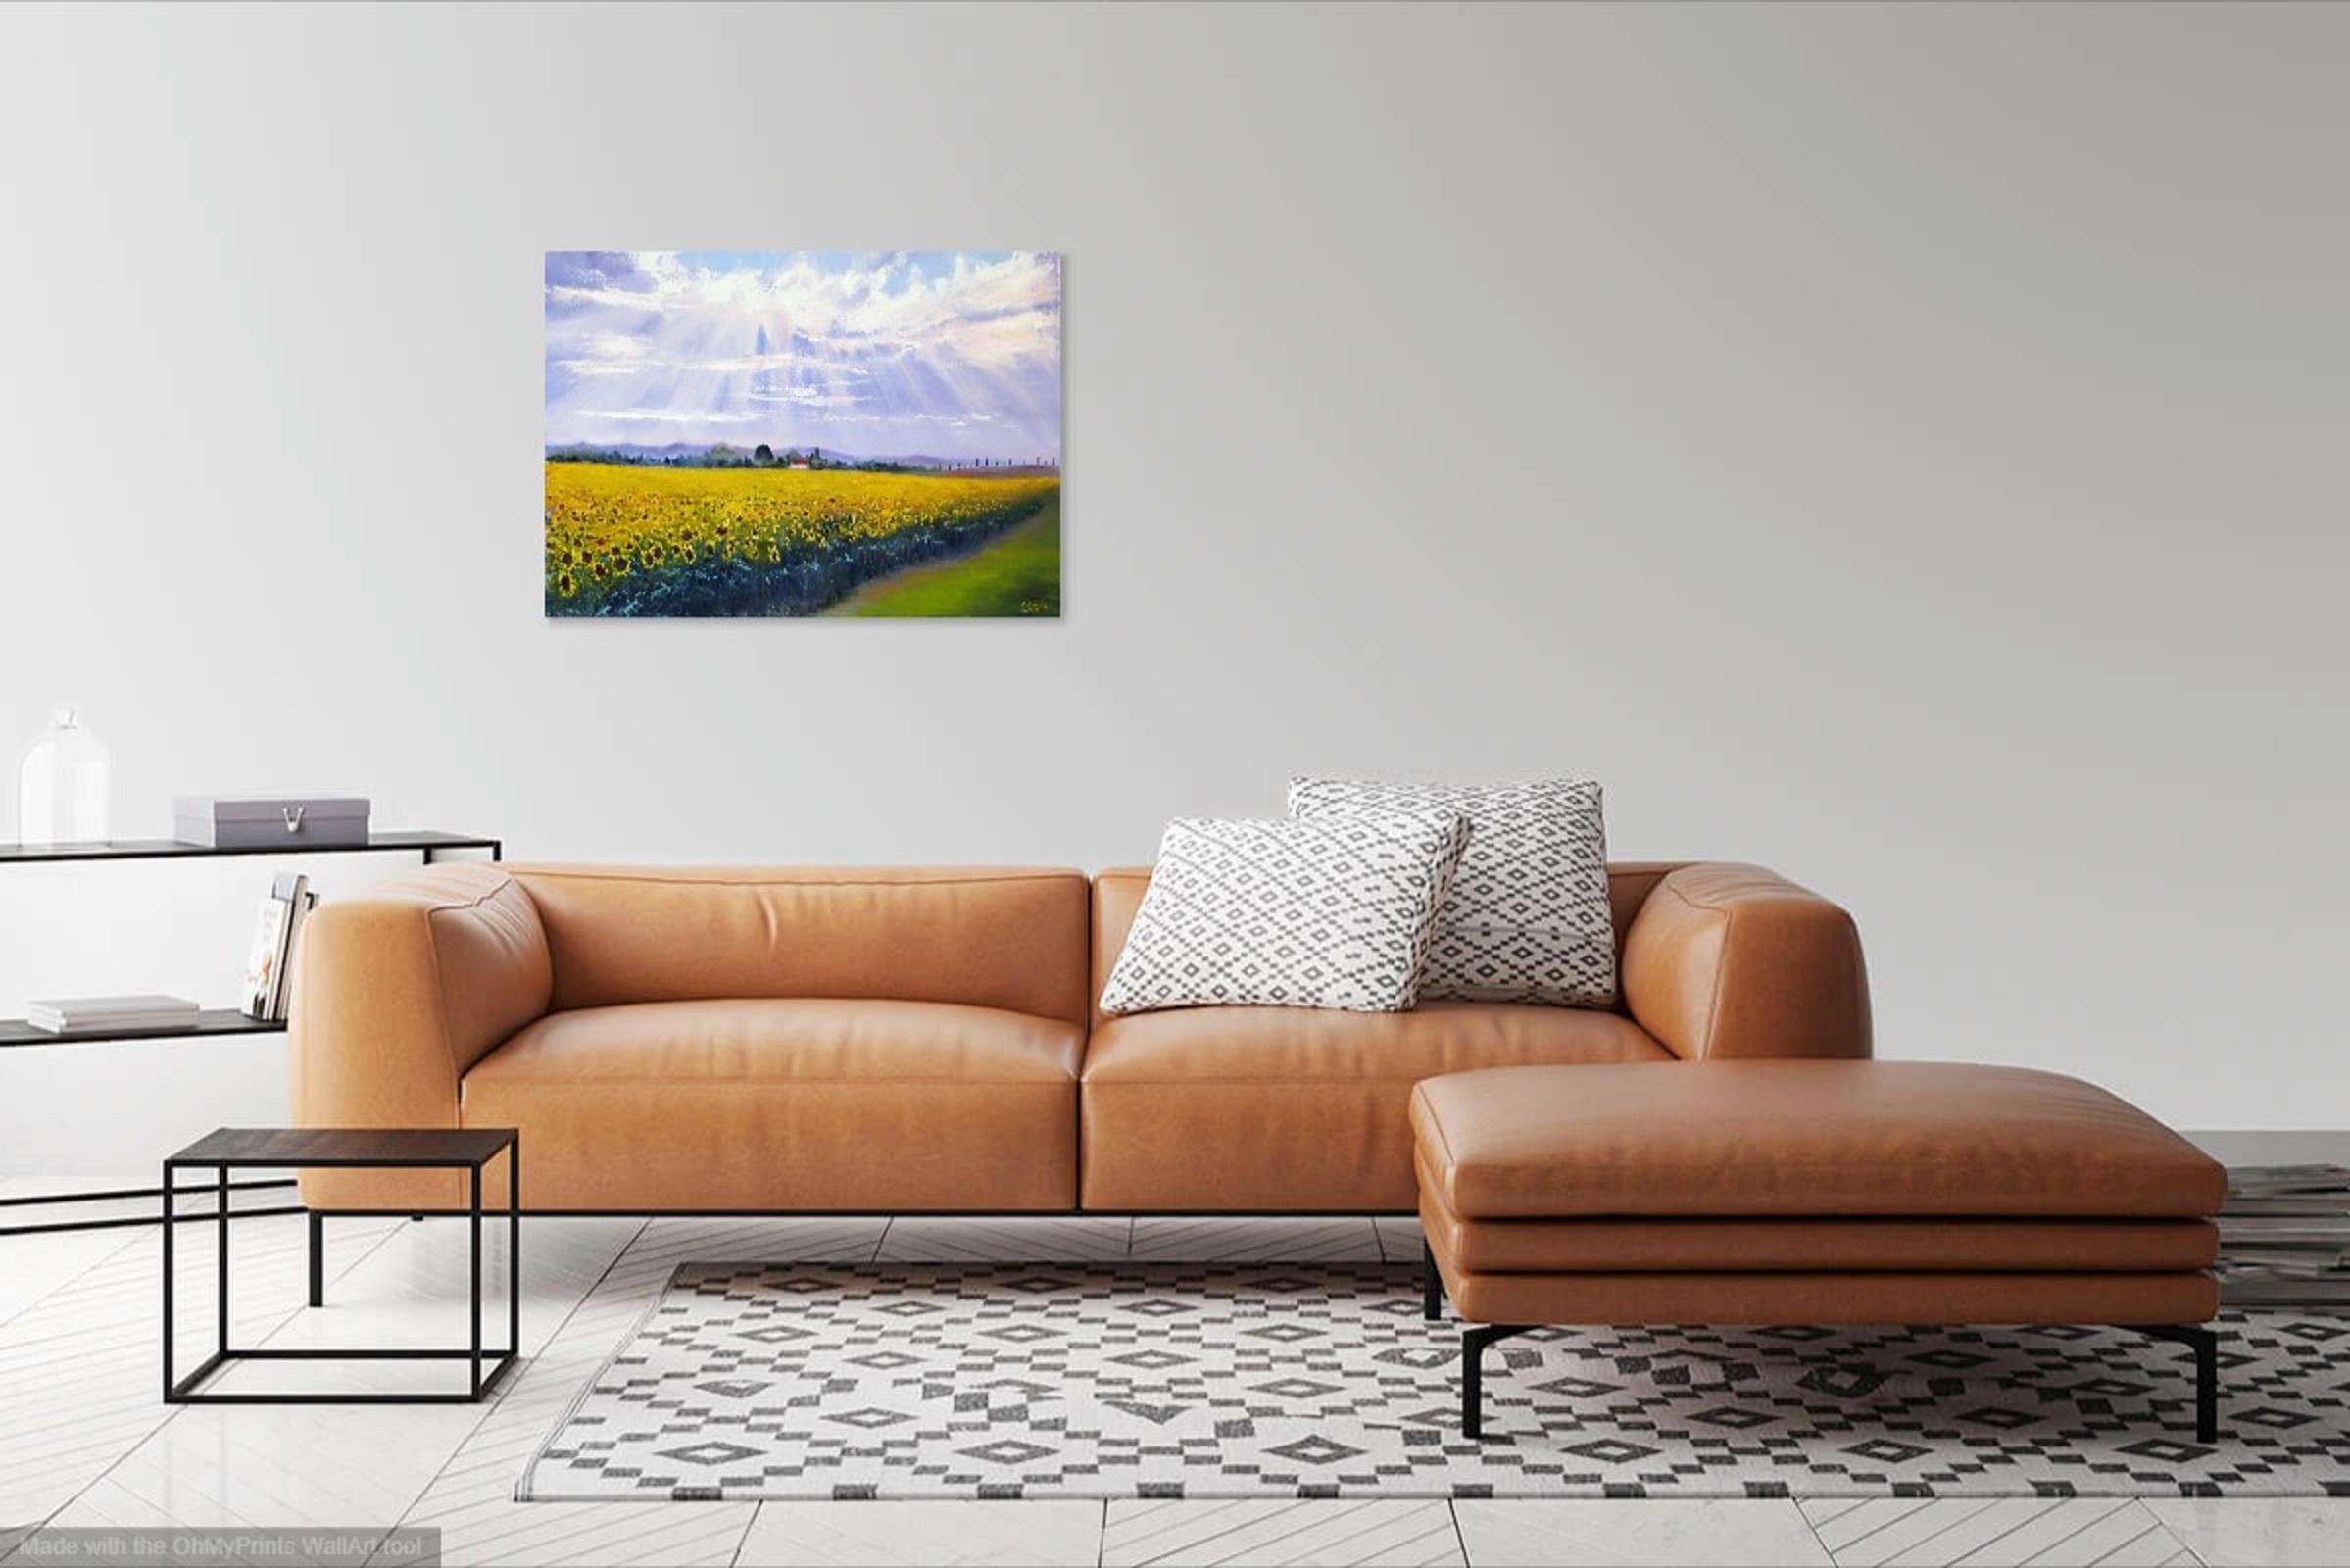 This piece is a vibrant celebration of nature's beauty and light's transformative power. Layered with oil, each brushstroke contributes to the vivid visual symphony. The sun, breaking through the clouds, bathes the sunflower field in a warm, radiant